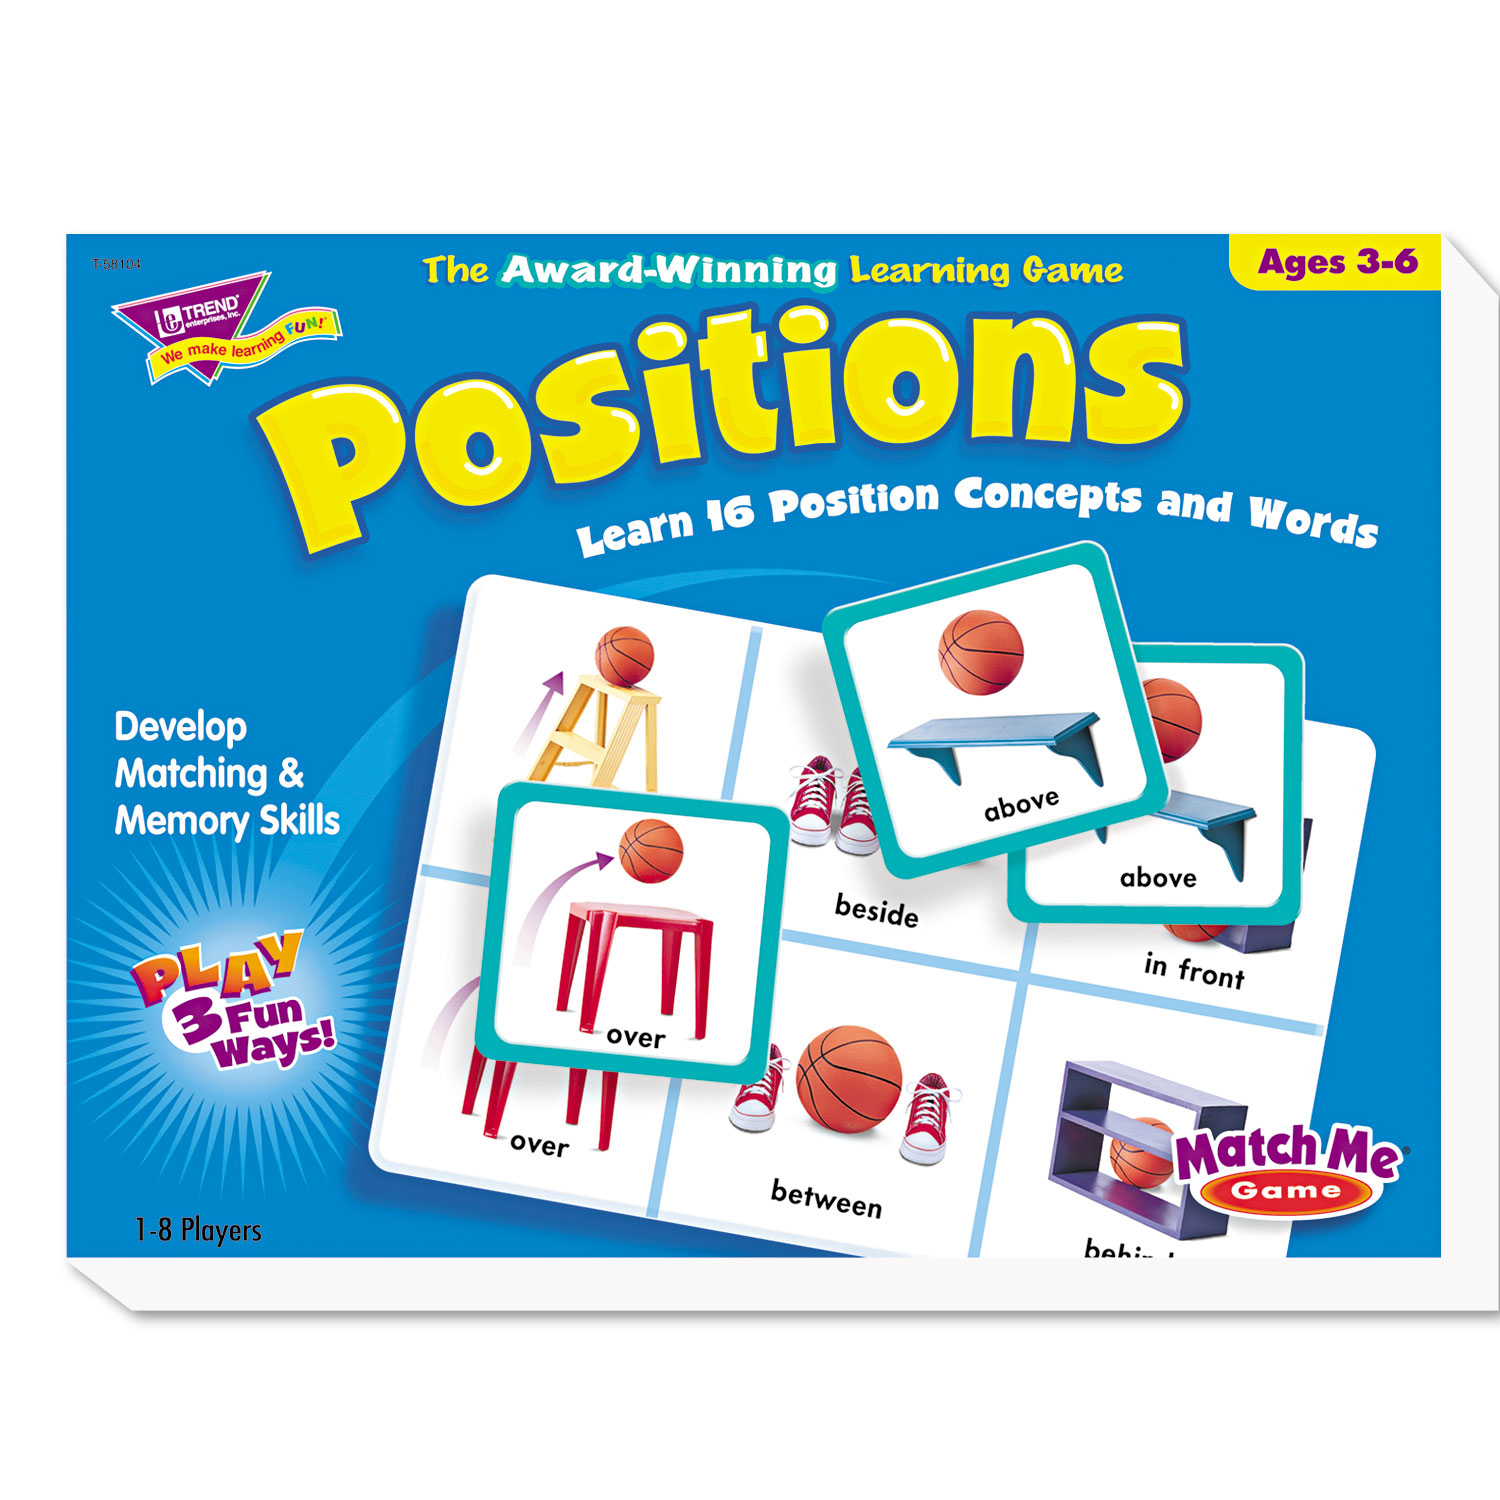 Positions Match Me Puzzle Game, Ages 5-8